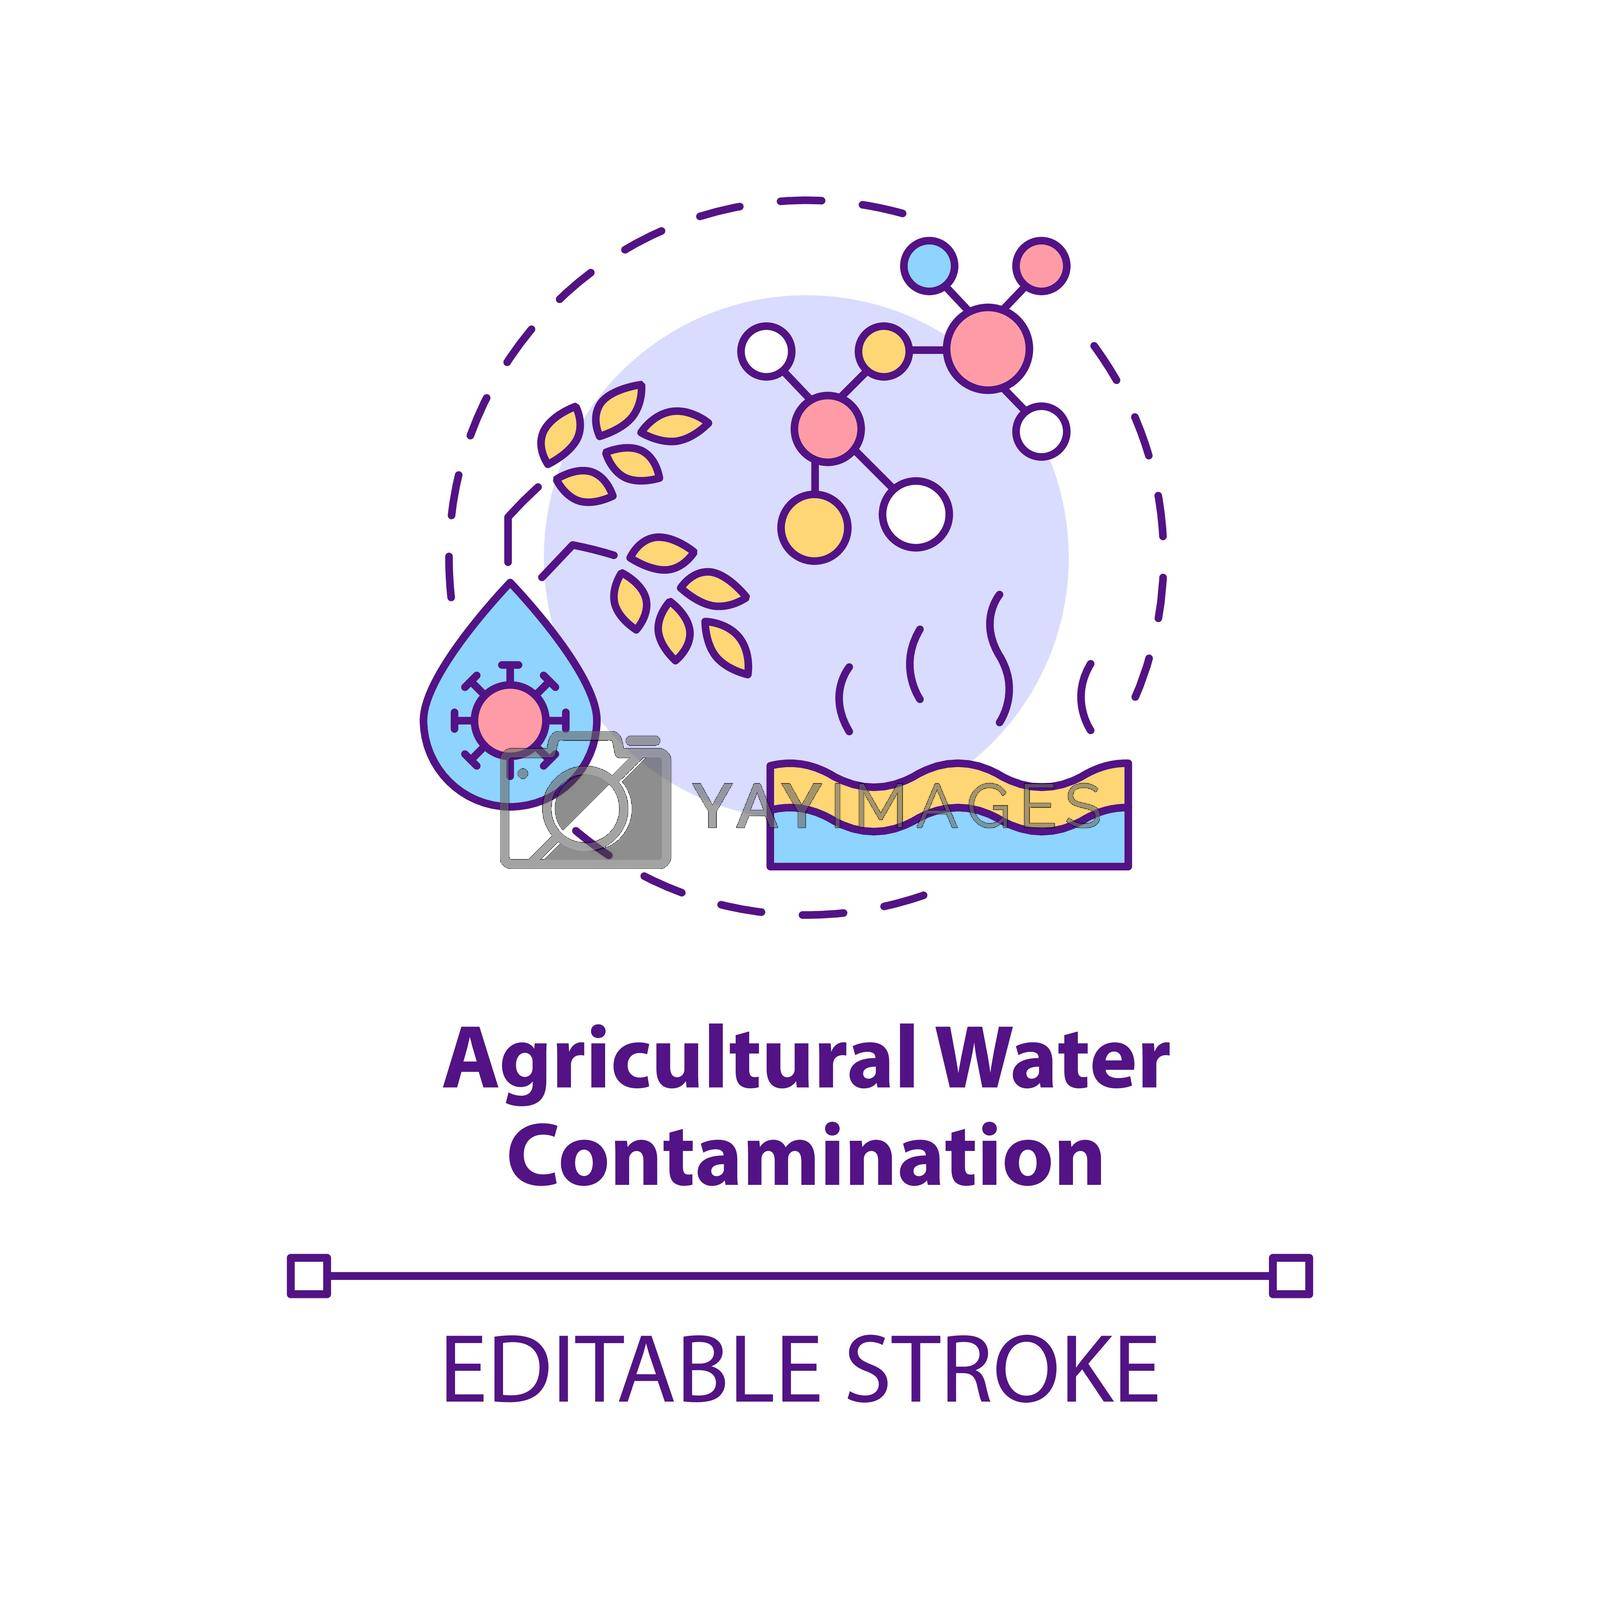 Royalty free image of Agricultural water contamination concept icon by bsd